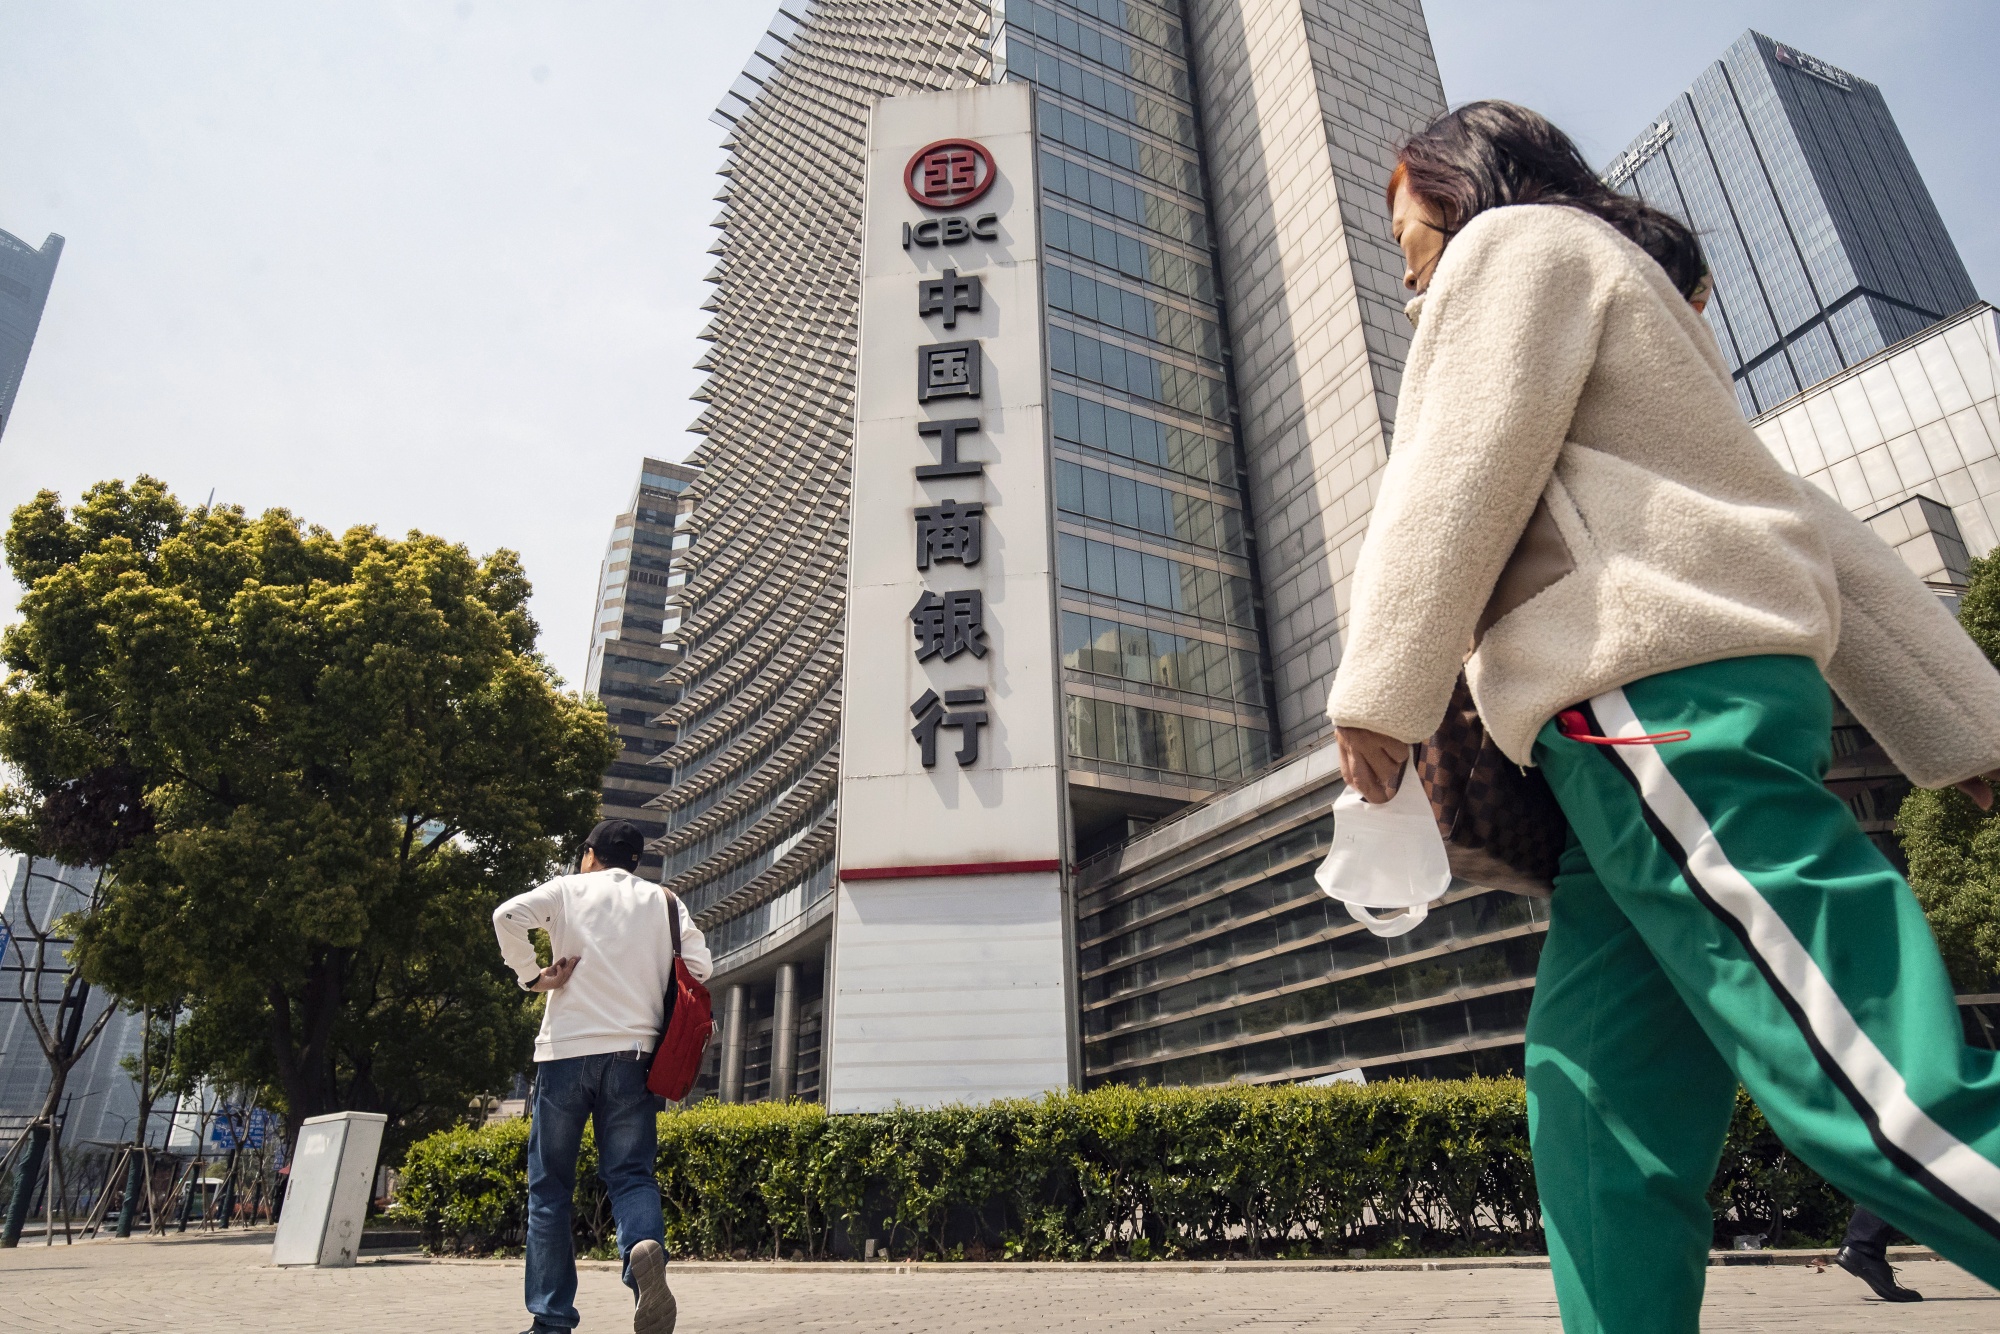 China's Big State Banks Plan Funding Spree as They Face Capital